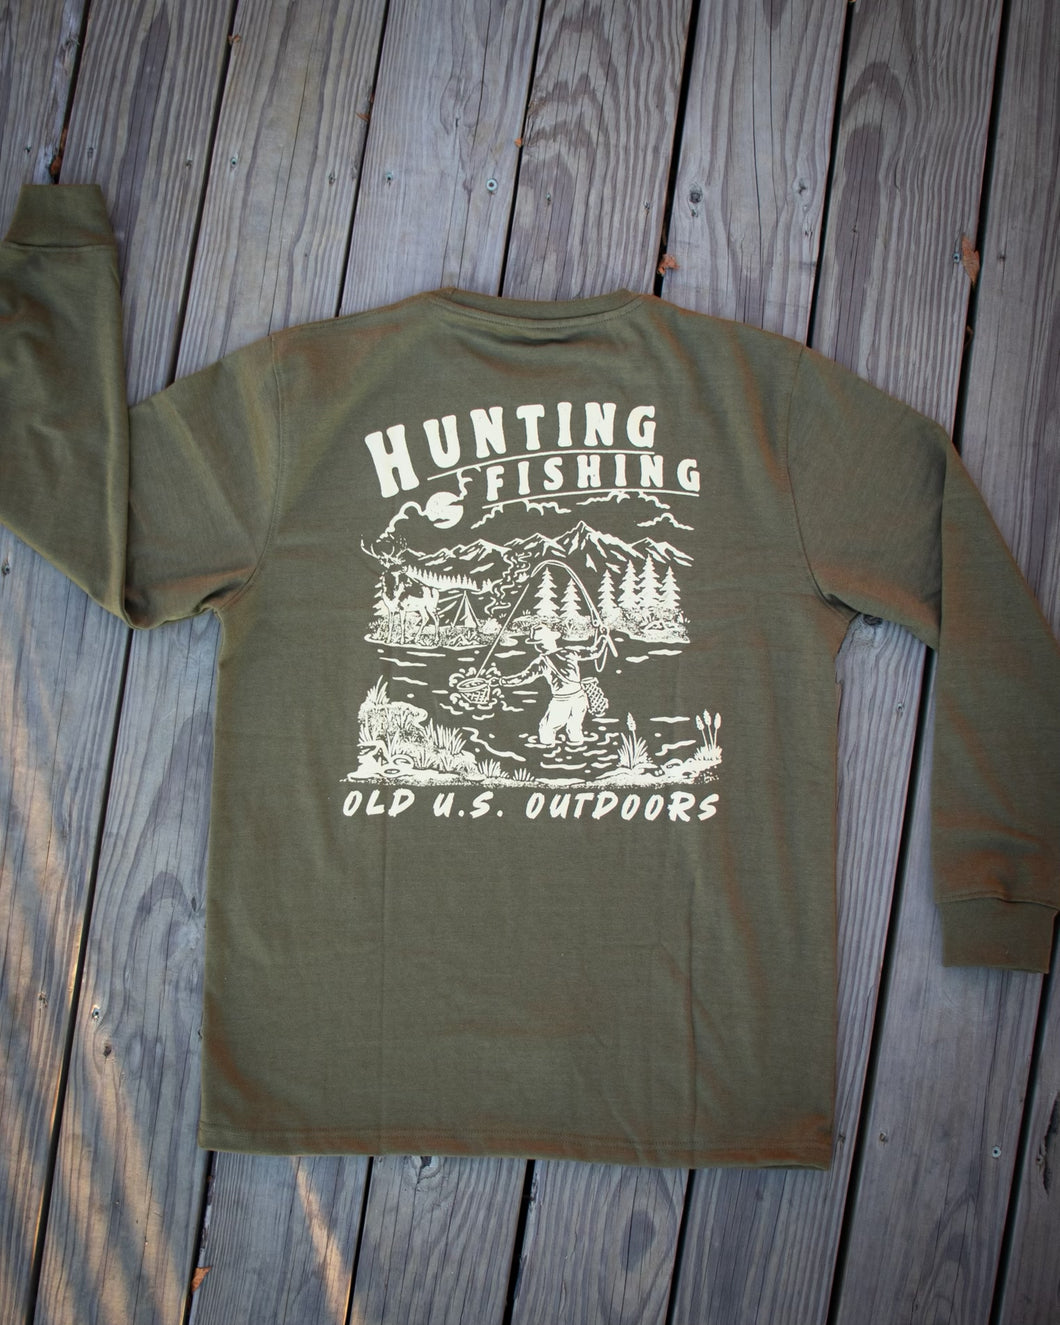 The Hunting & Fishing Crewneck runs one size smaller